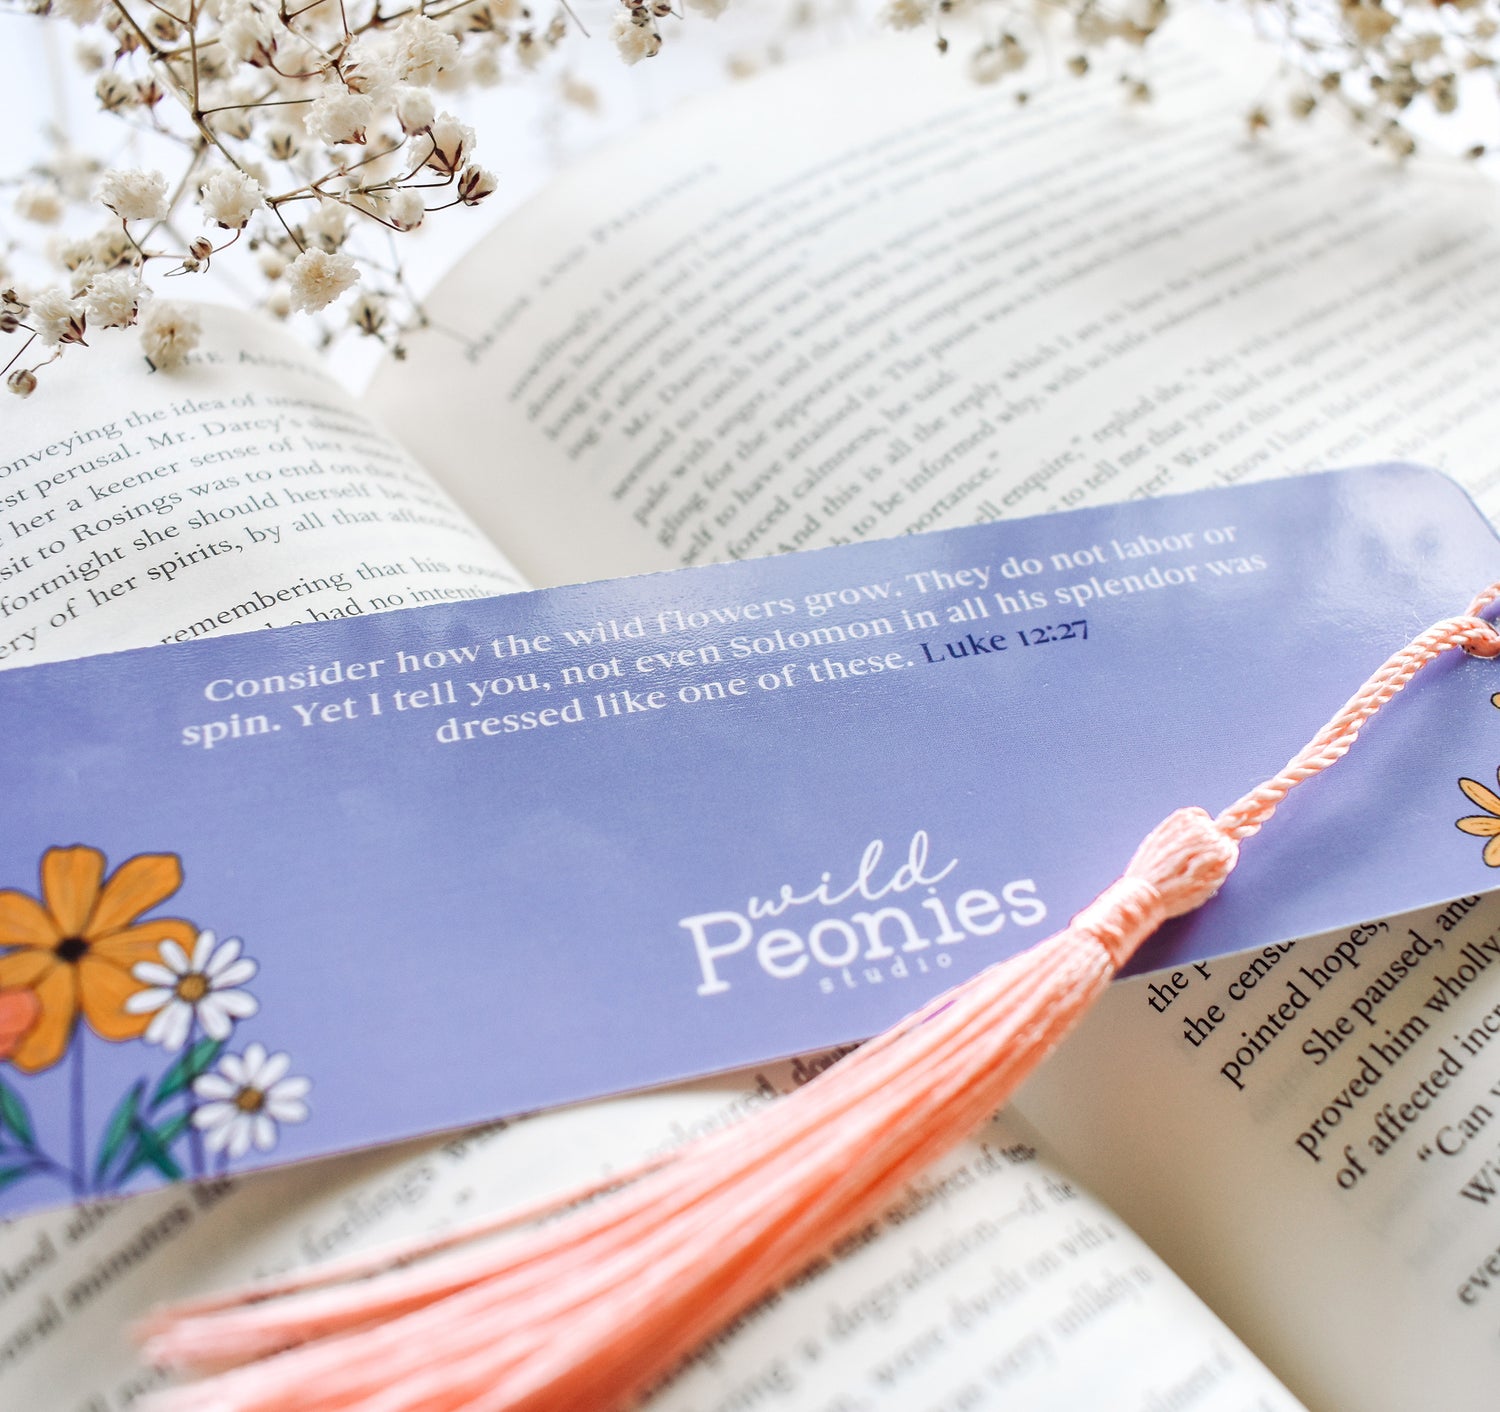 Christian Luke 12:27 Bible verse bookmark with flowers and a pink tassel